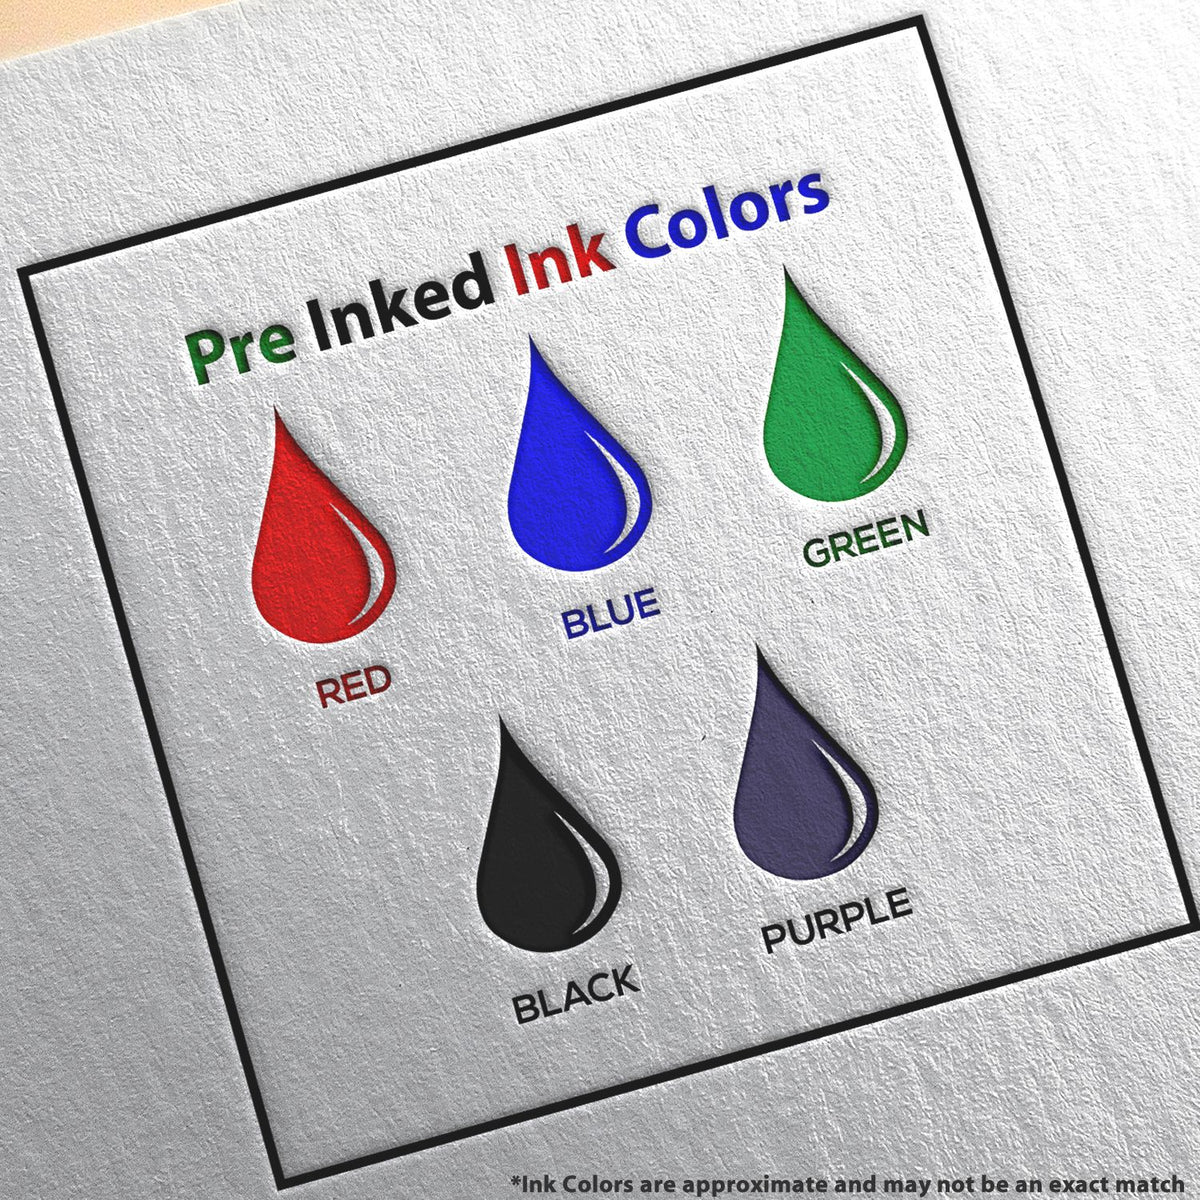 A picture showing the different ink colors or hues available for the PSI Arizona Notary Stamp product.